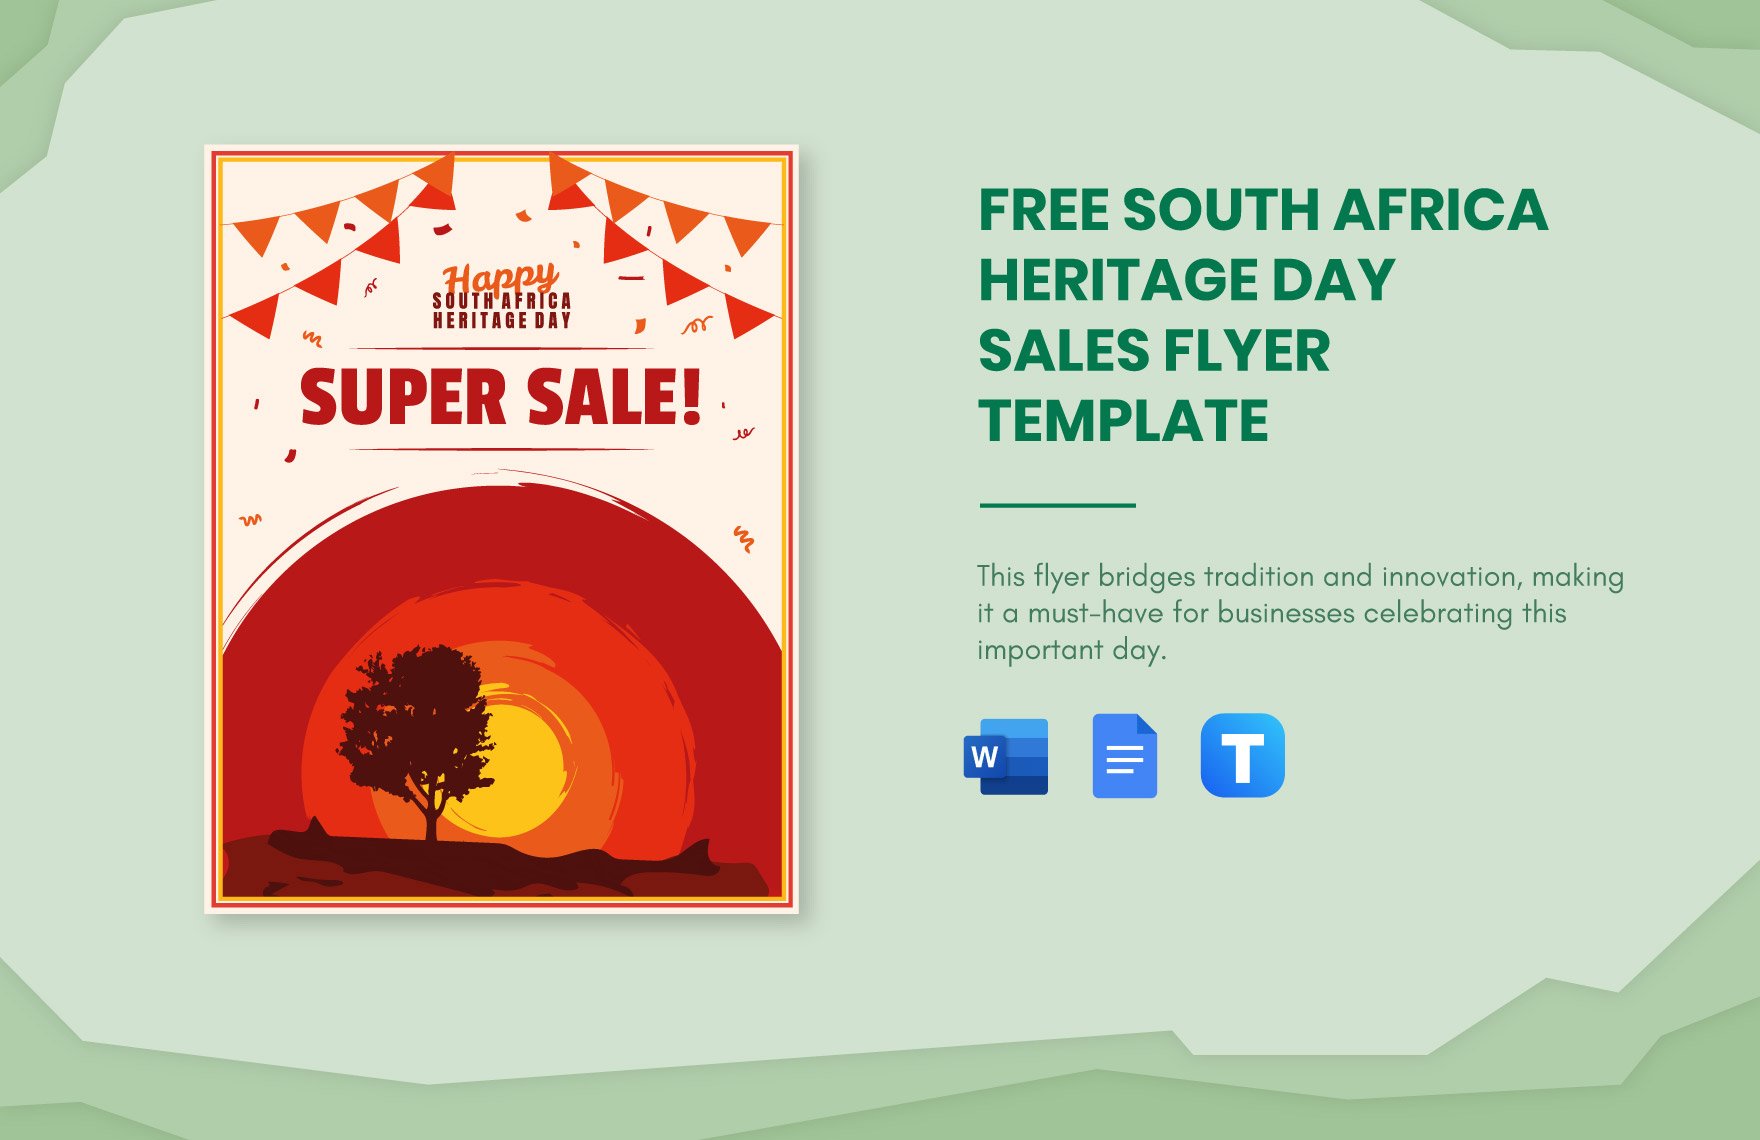 South Africa Heritage Day Sales Flyer Template